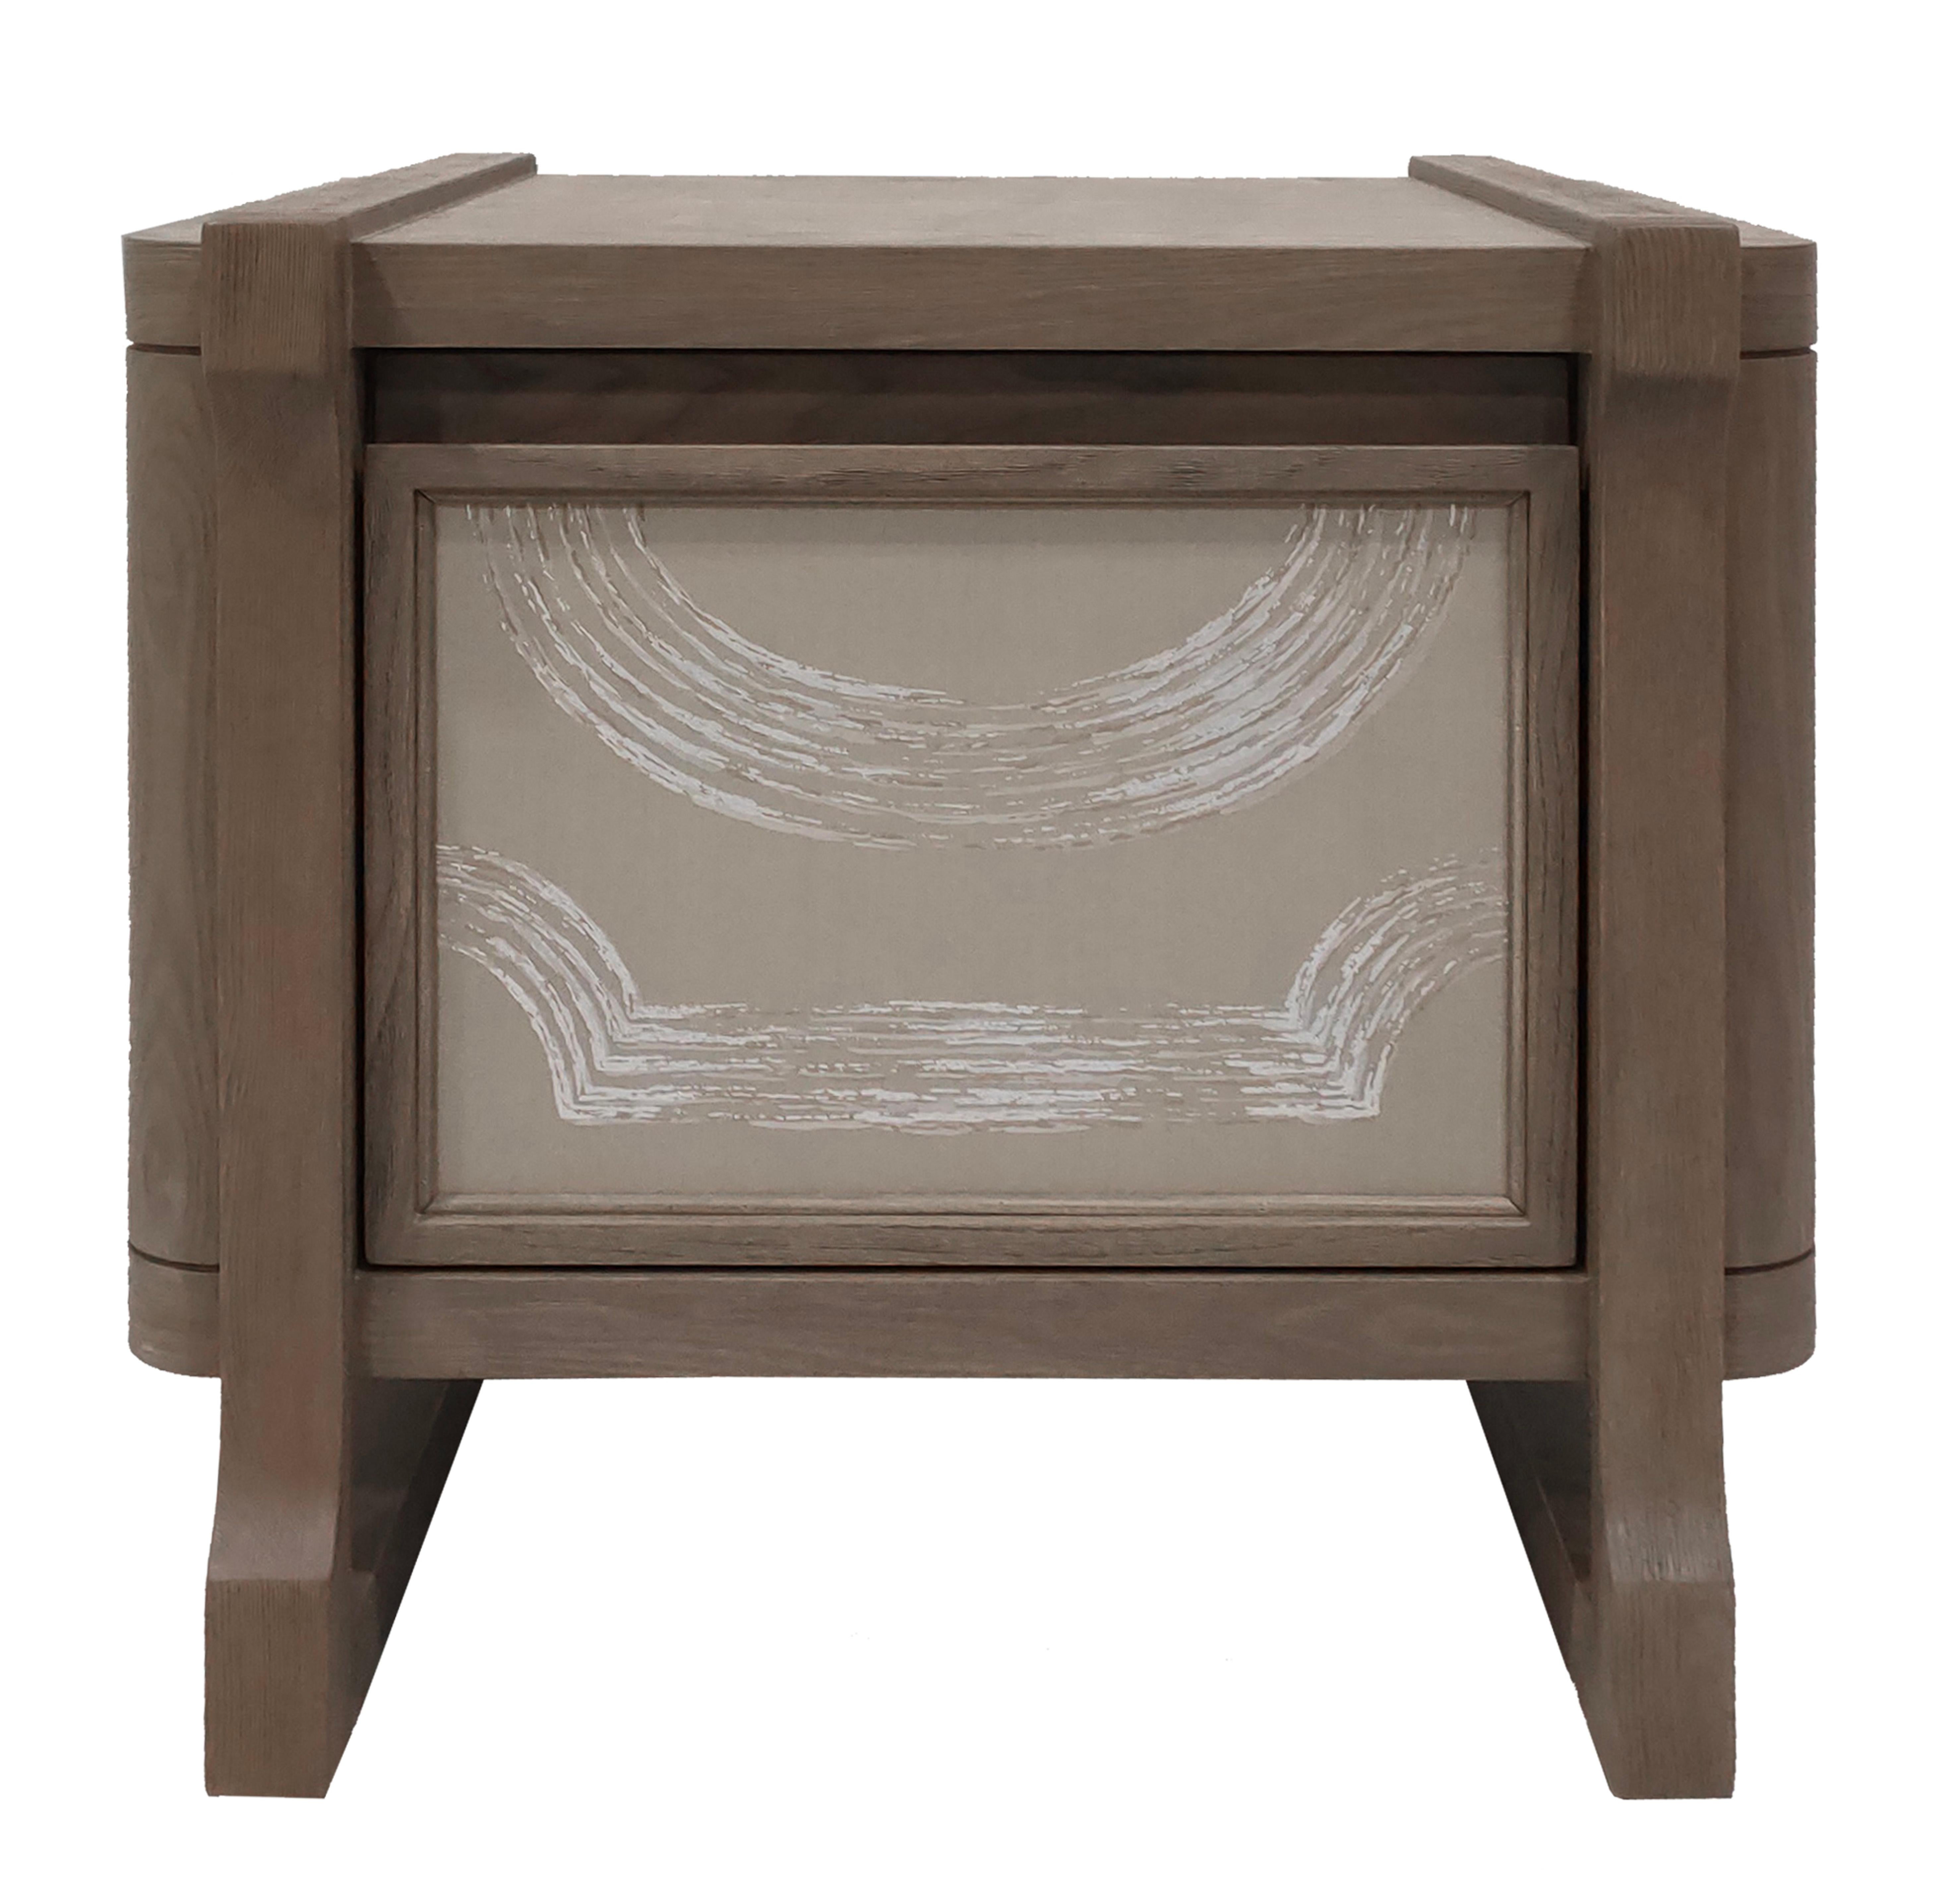 Description: Bedside cabinet in pinewood and oak wood with De Gournay covering
Color: Grey and lead grey
Size: 55 x 45 x 50 H cm
Material: Pinewood and oak wood
Collection: Art Déco Garden.